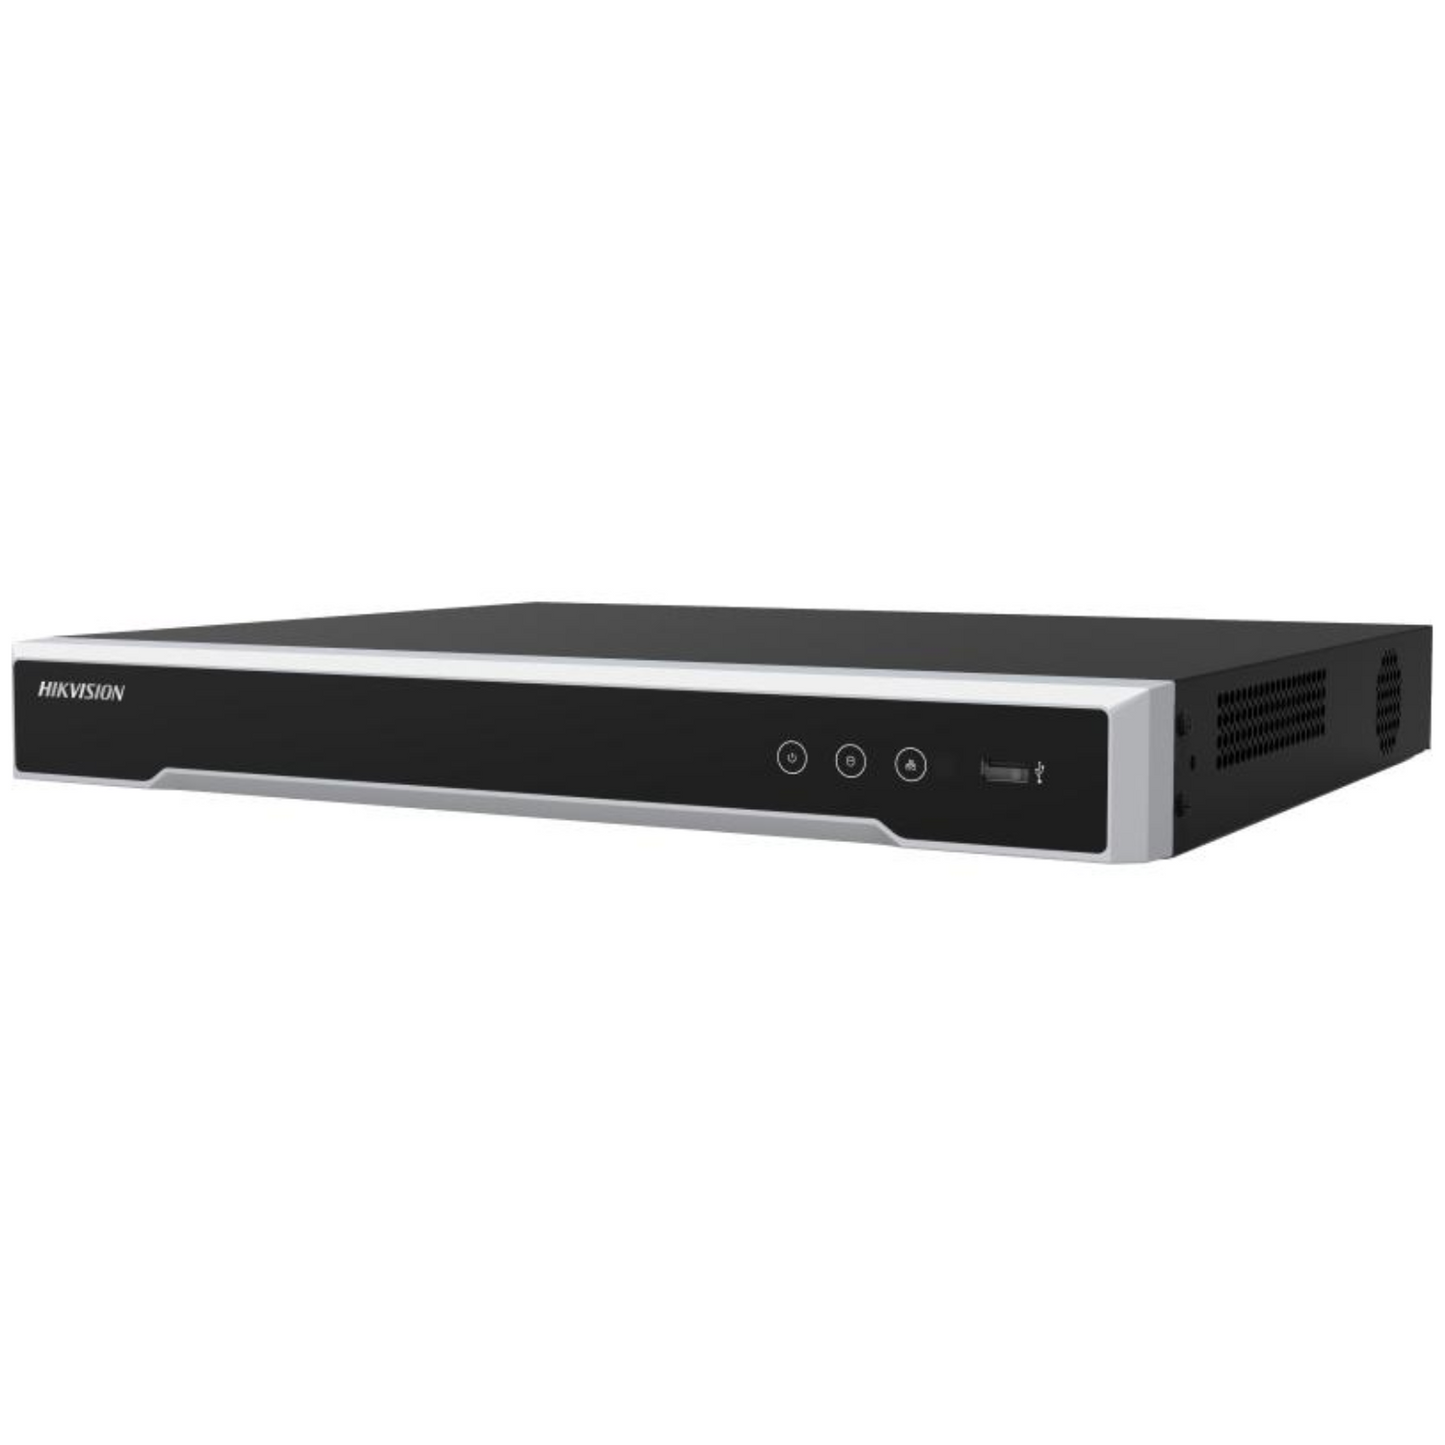 8K 8-Channel Hikvision 1U PoE NVR DS-7608NI-M2-8P - High-Resolution Network Video Recorder